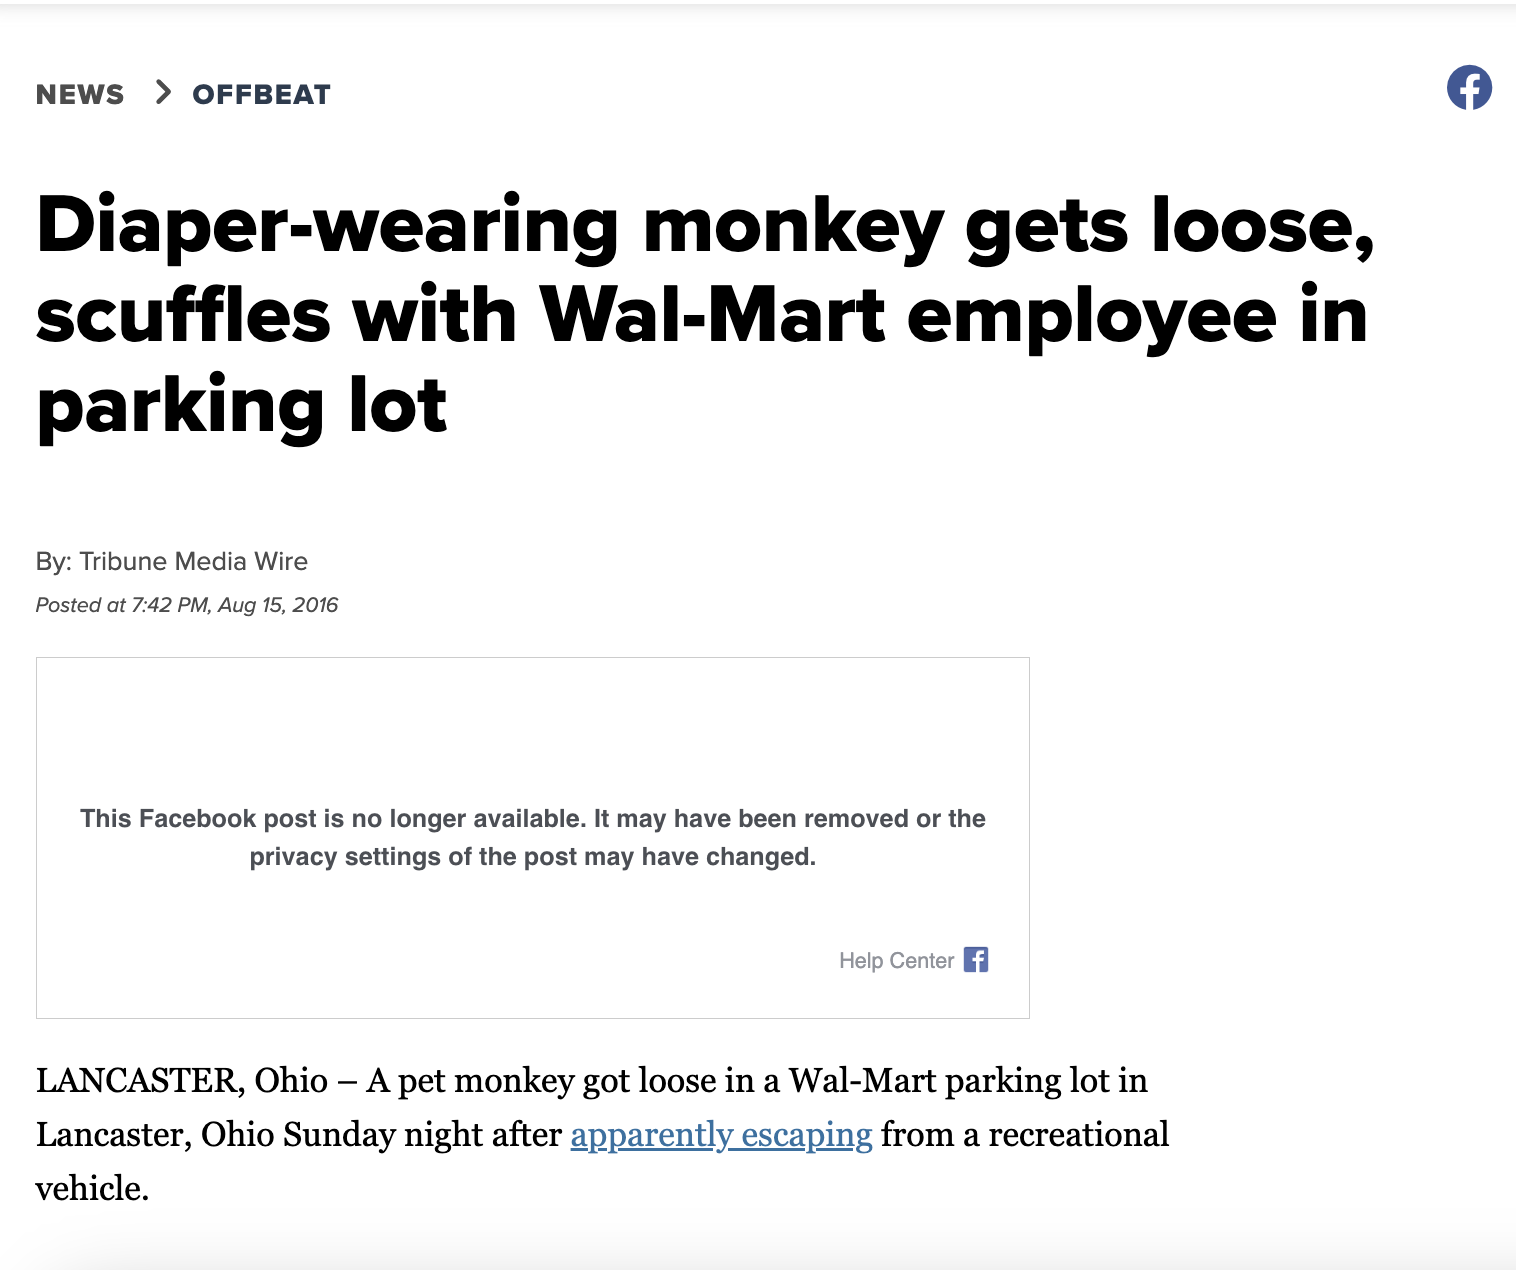 screenshot - News > Offbeat Diaperwearing monkey gets loose, scuffles with WalMart employee in parking lot By Tribune Media Wire Posted at , This Facebook post is no longer available. It may have been removed or the privacy settings of the post may have c